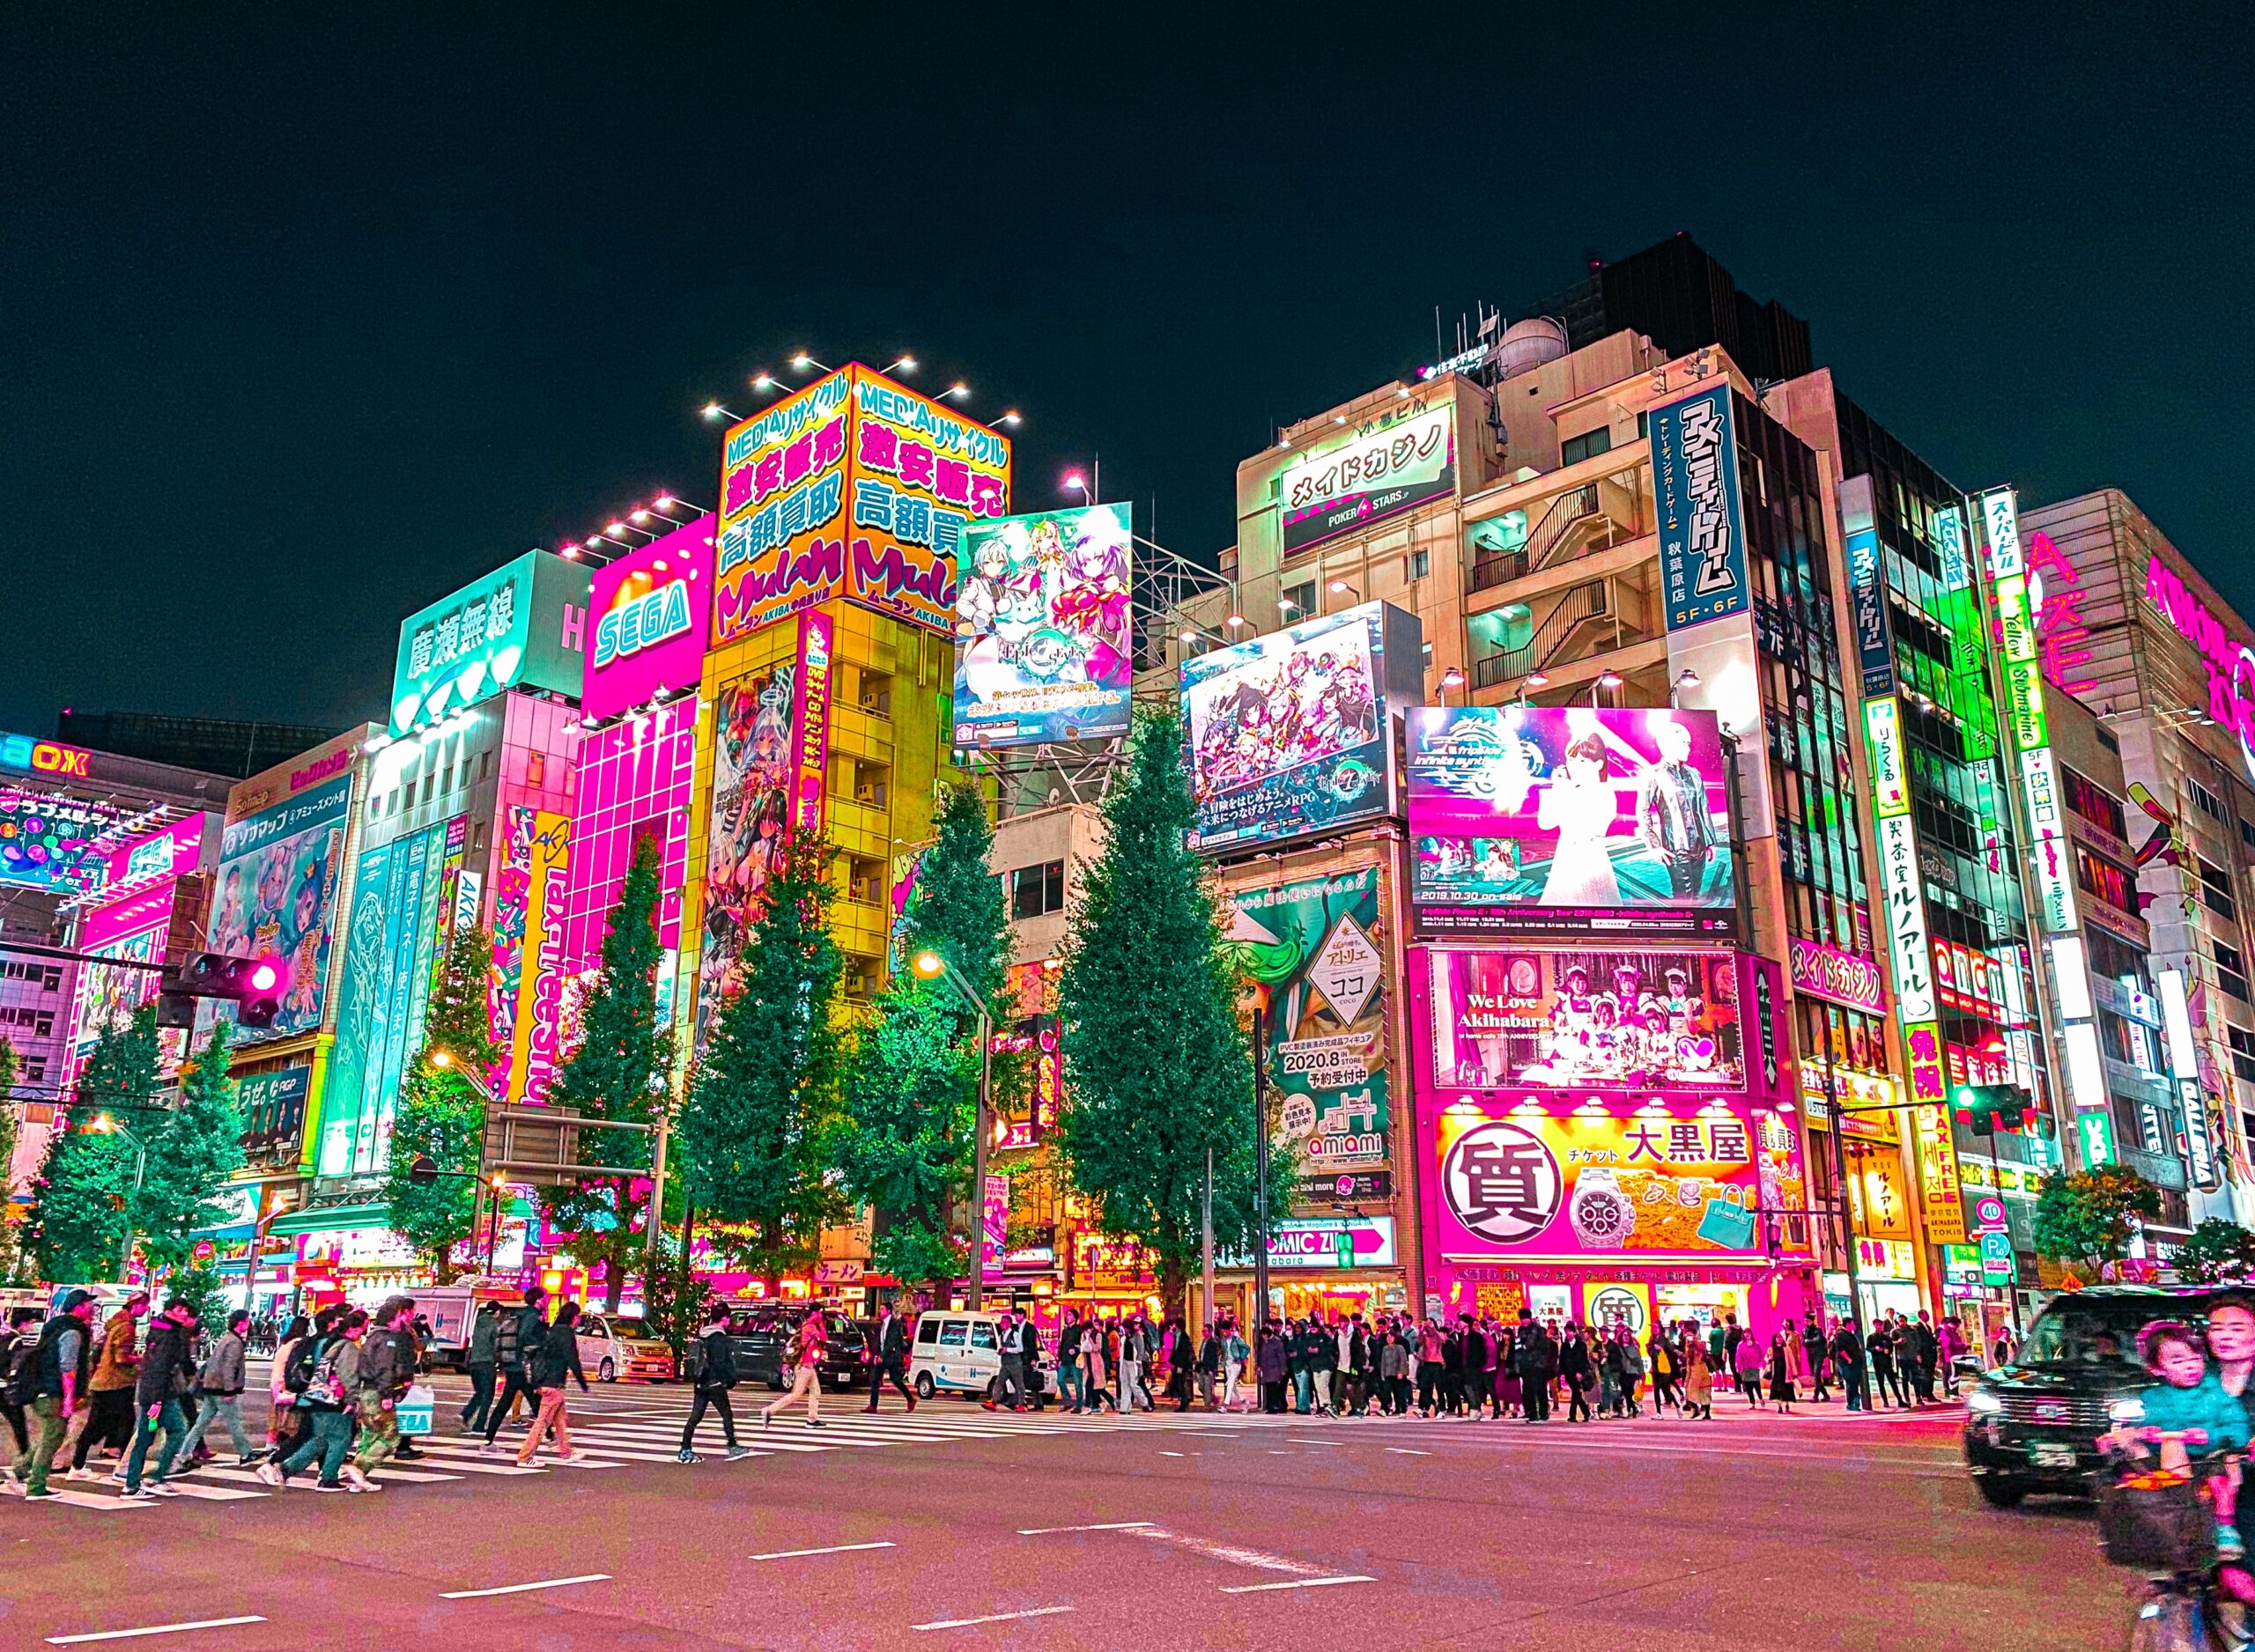 Akihabara is a bustling area that has many activities and attractions. 
pictured: Akihabara on a busy night with many buildings brightening up the streets lined with people